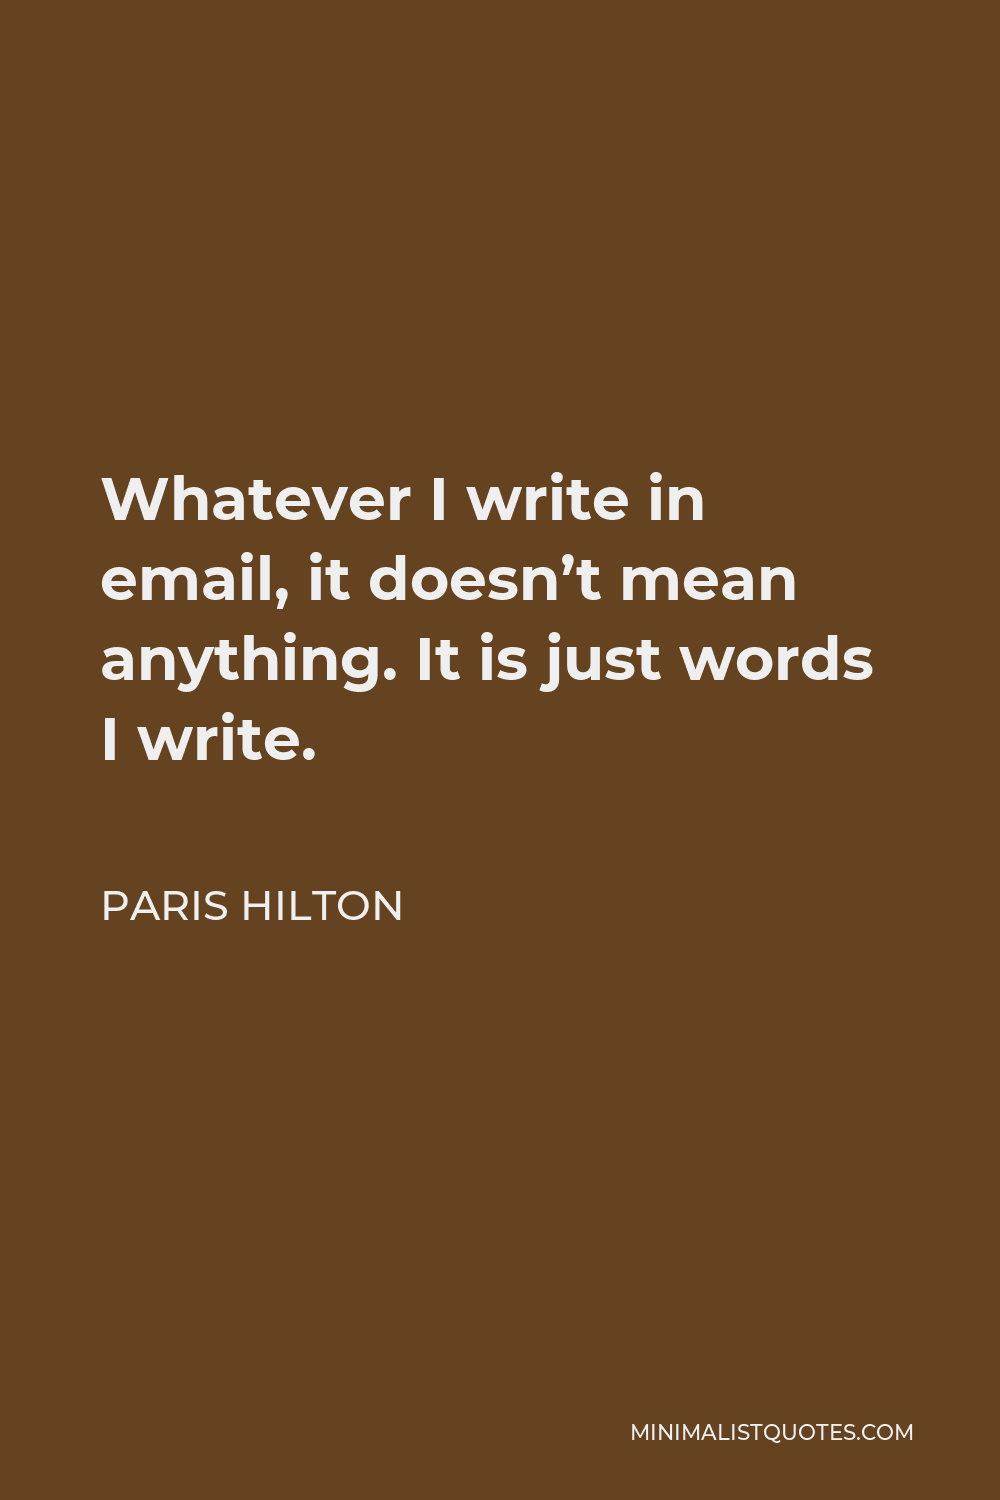 Paris Hilton Quote - Whatever I write in email, it doesn’t mean anything. It is just words I write.